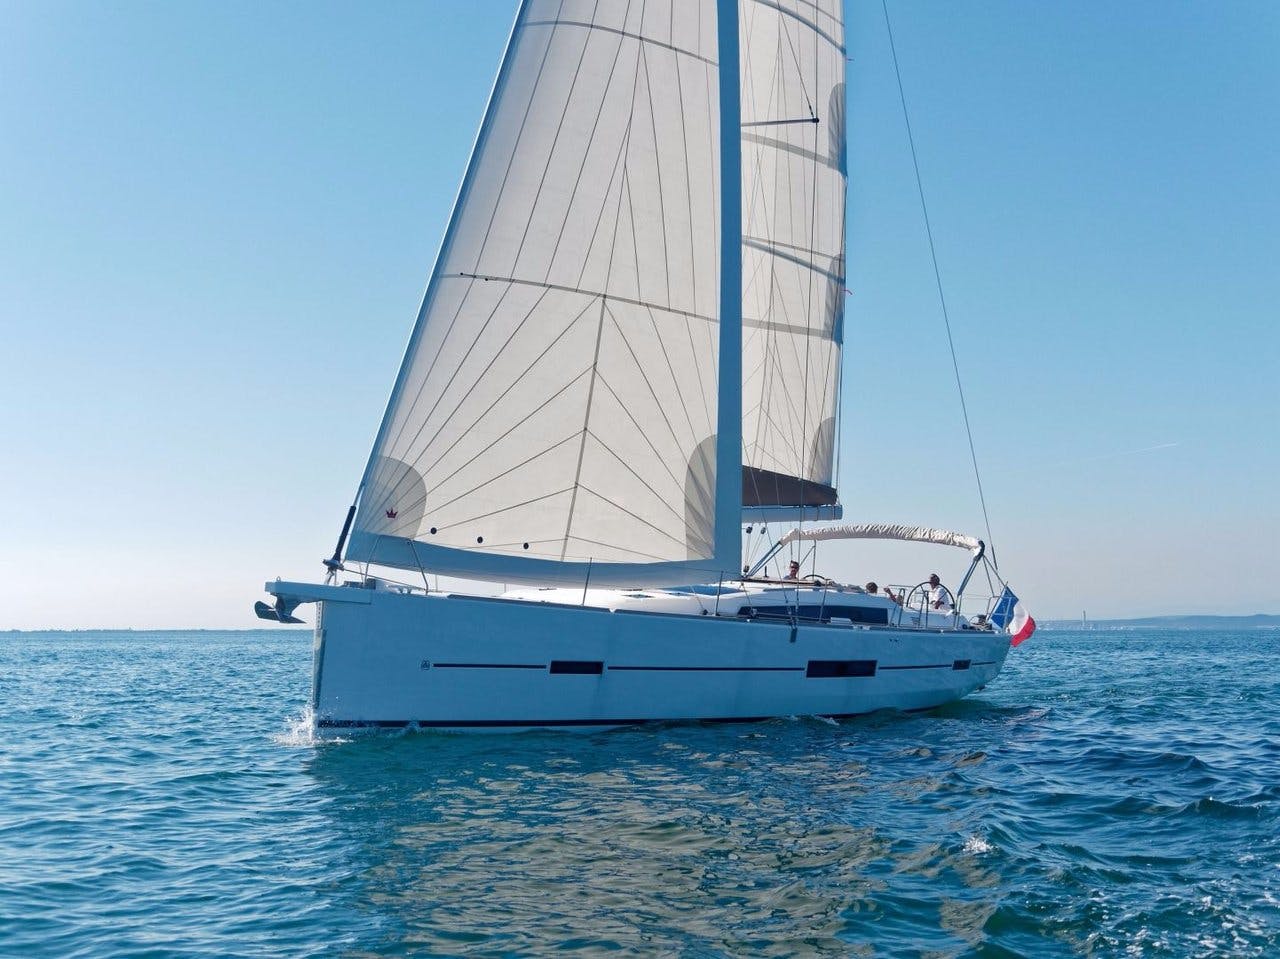 Book Dufour 512 GL - 4 cab. Sailing yacht for bareboat charter in Sicily, Portorosa, Sicily, Italy with TripYacht!, picture 1